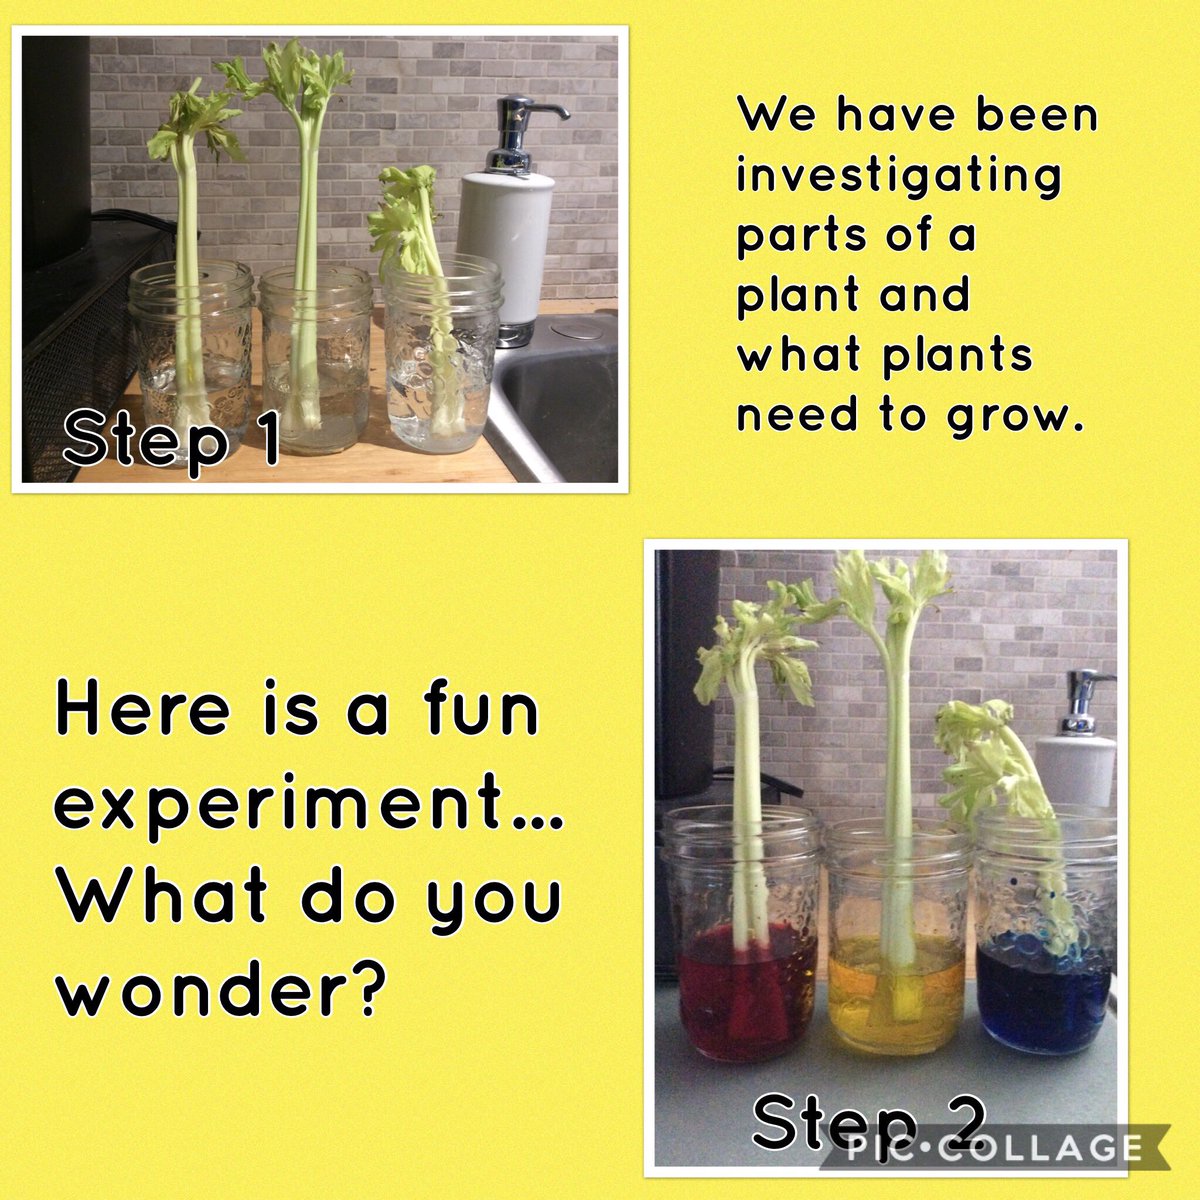 Now we wait... Check back later to see what has happened. 🌱😊 #sciencefun #whatdoyouwonder